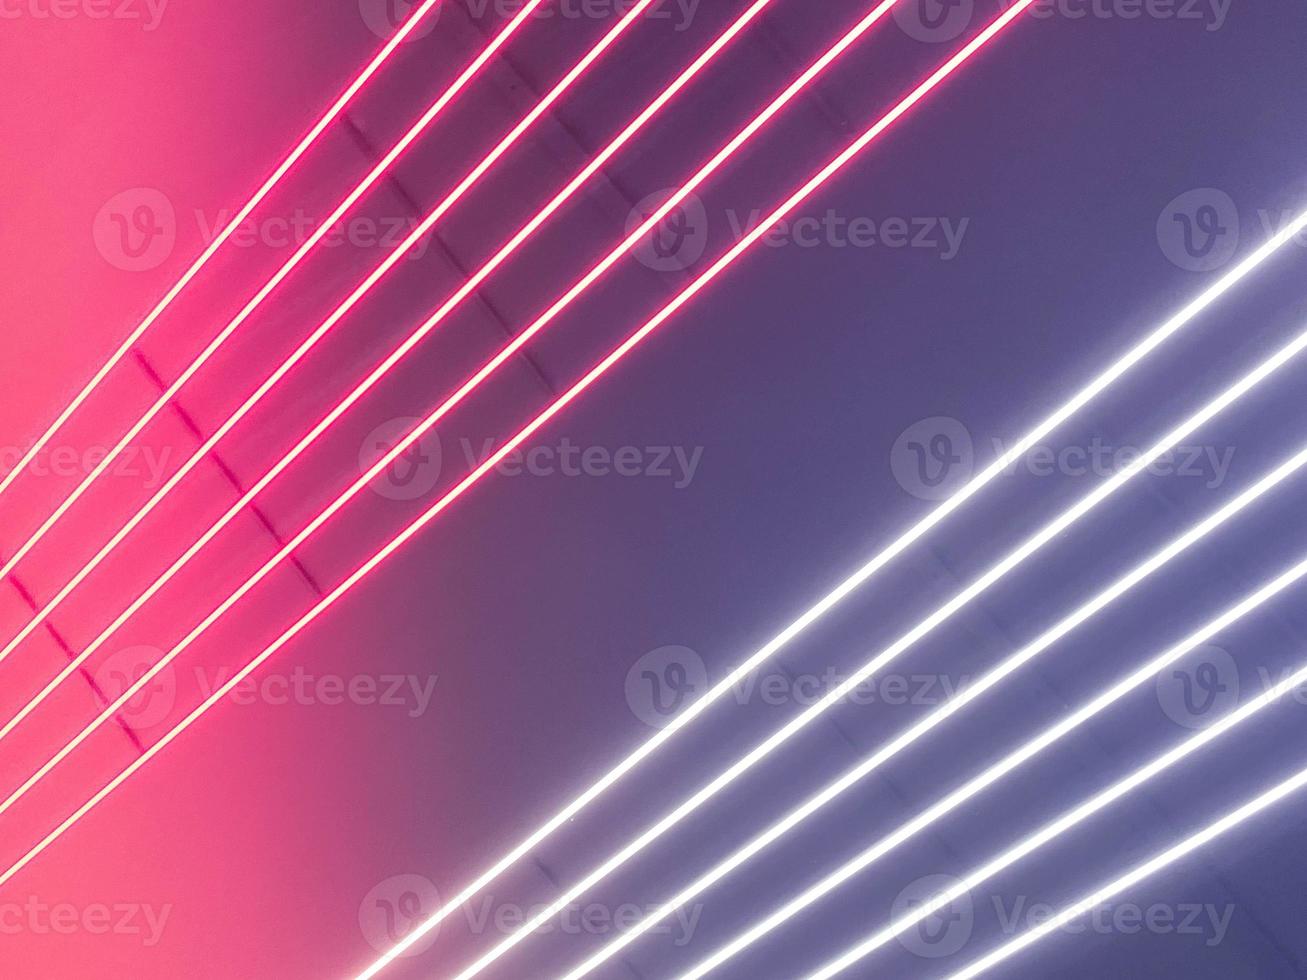 Texture of purple, pink and white glowing bright neon LED multicolored laser abstract stripes and lines from parallel lamps. The background photo